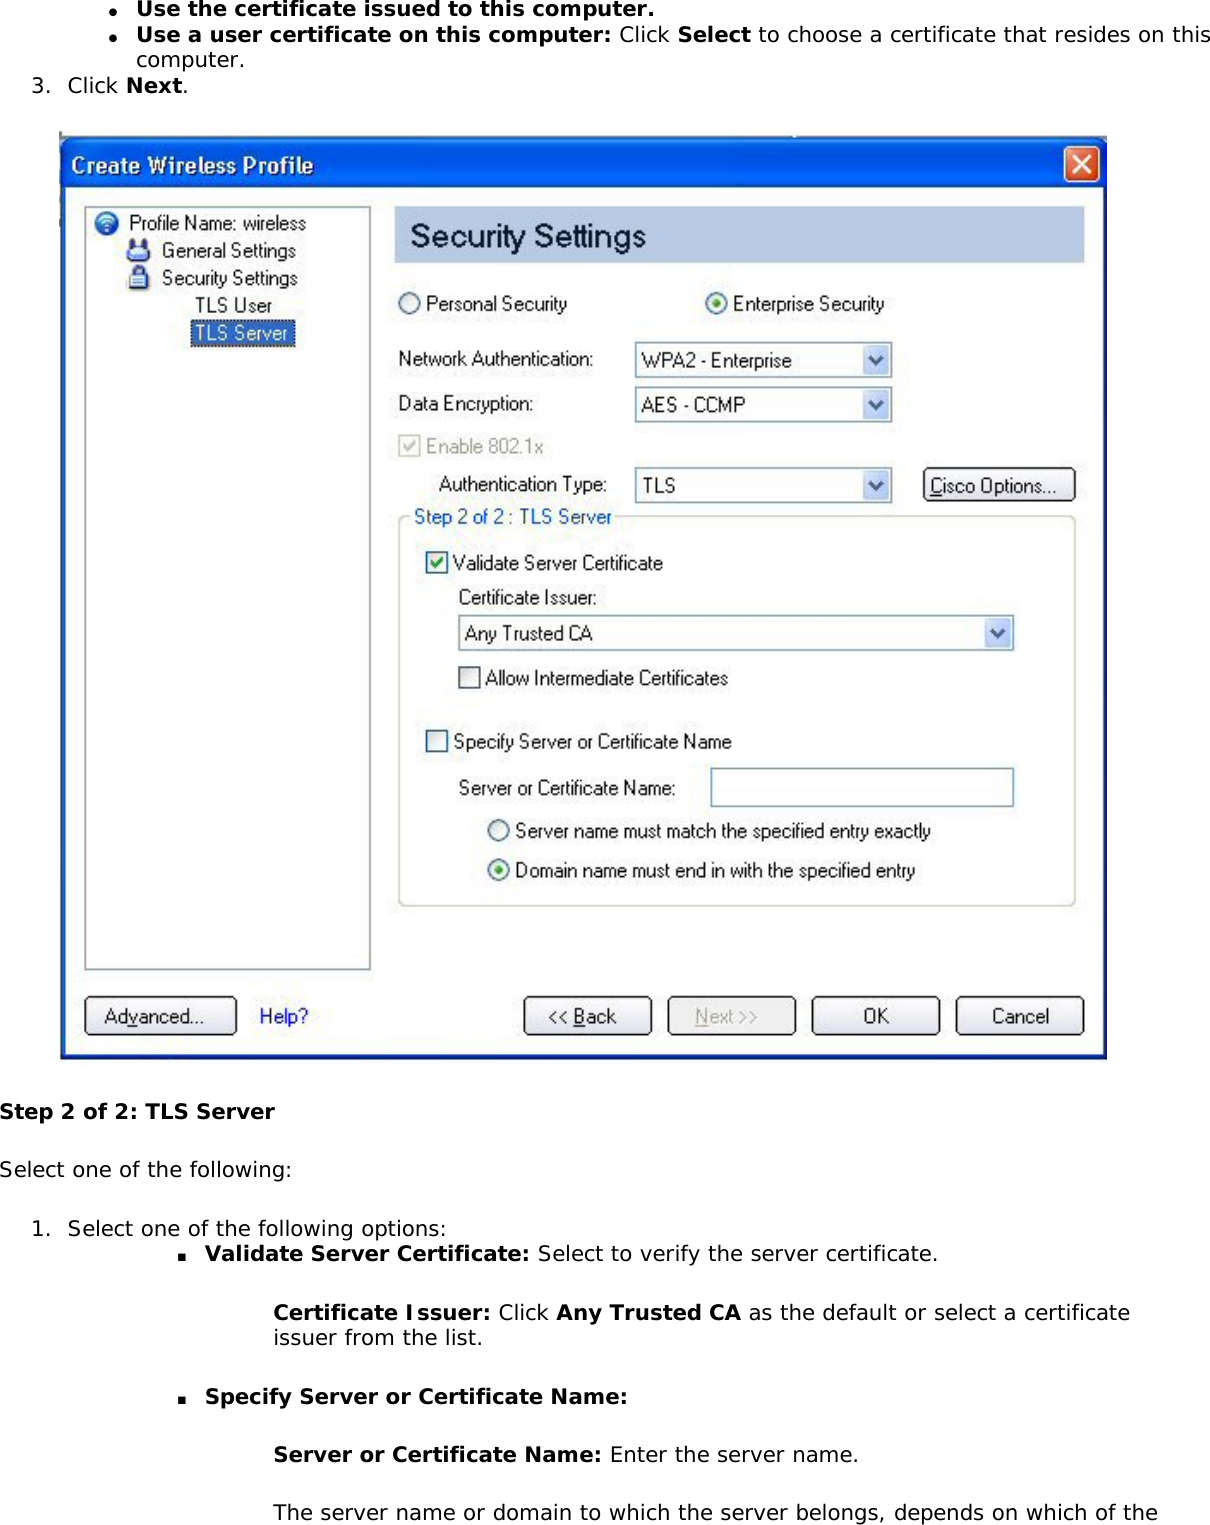 ●     Use the certificate issued to this computer.●     Use a user certificate on this computer: Click Select to choose a certificate that resides on this computer. 3.  Click Next. Step 2 of 2: TLS ServerSelect one of the following: 1.  Select one of the following options: ■     Validate Server Certificate: Select to verify the server certificate. Certificate Issuer: Click Any Trusted CA as the default or select a certificate issuer from the list. ■     Specify Server or Certificate Name: Server or Certificate Name: Enter the server name. The server name or domain to which the server belongs, depends on which of the 